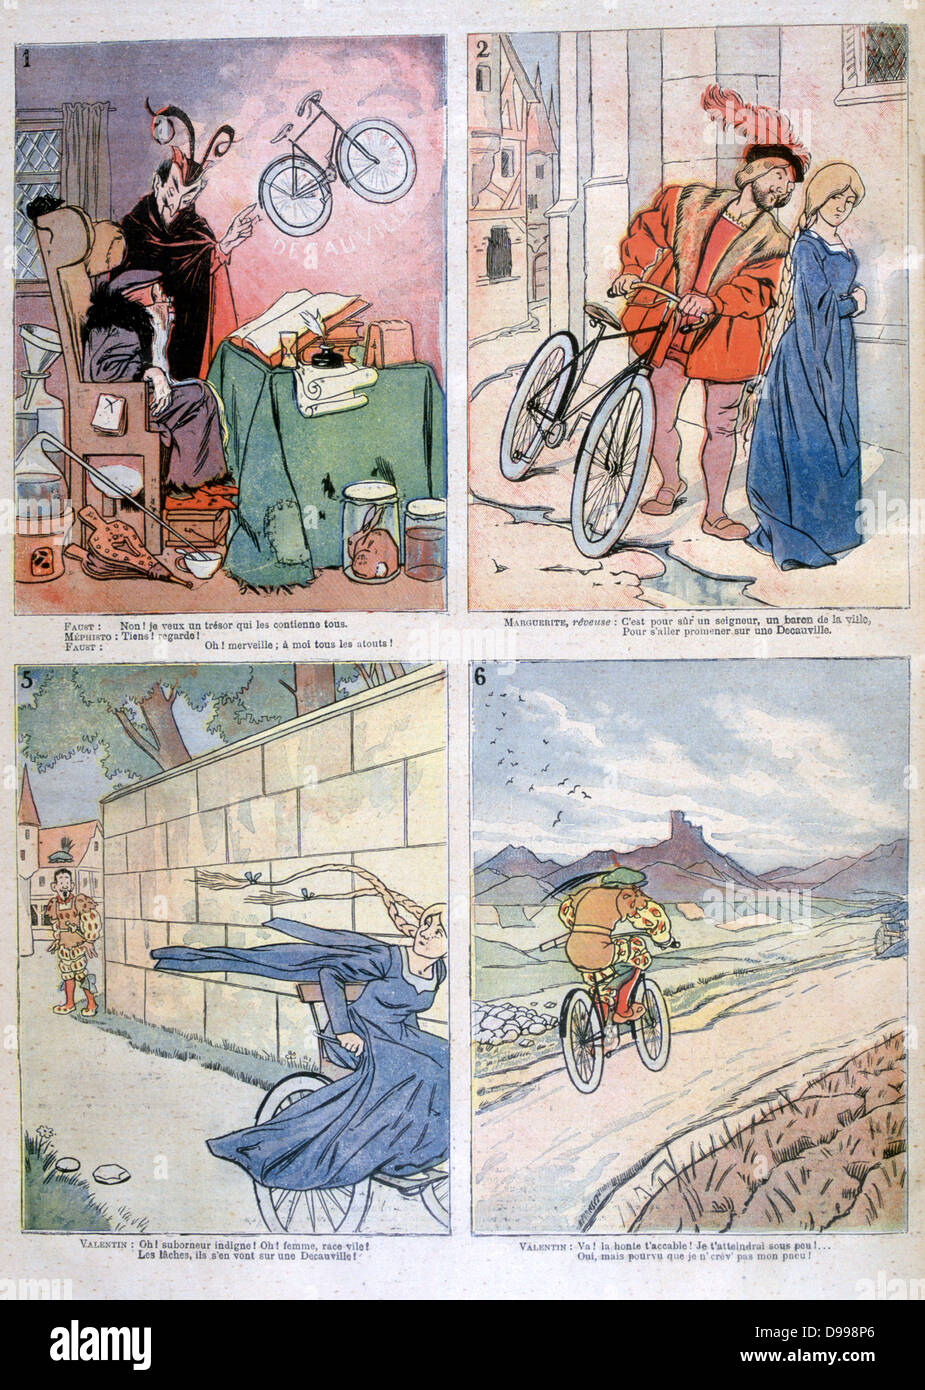 Bicycle applied to the Legend of Faust: From - Temptation by Mephistopheles, A rejuvinated Strauss courting Marguerite, To Faust and Marguerite escaping on tricycle. From 'Le Petit Journal',  Paris, 2 April 1894. (also 0510007479). Stock Photo